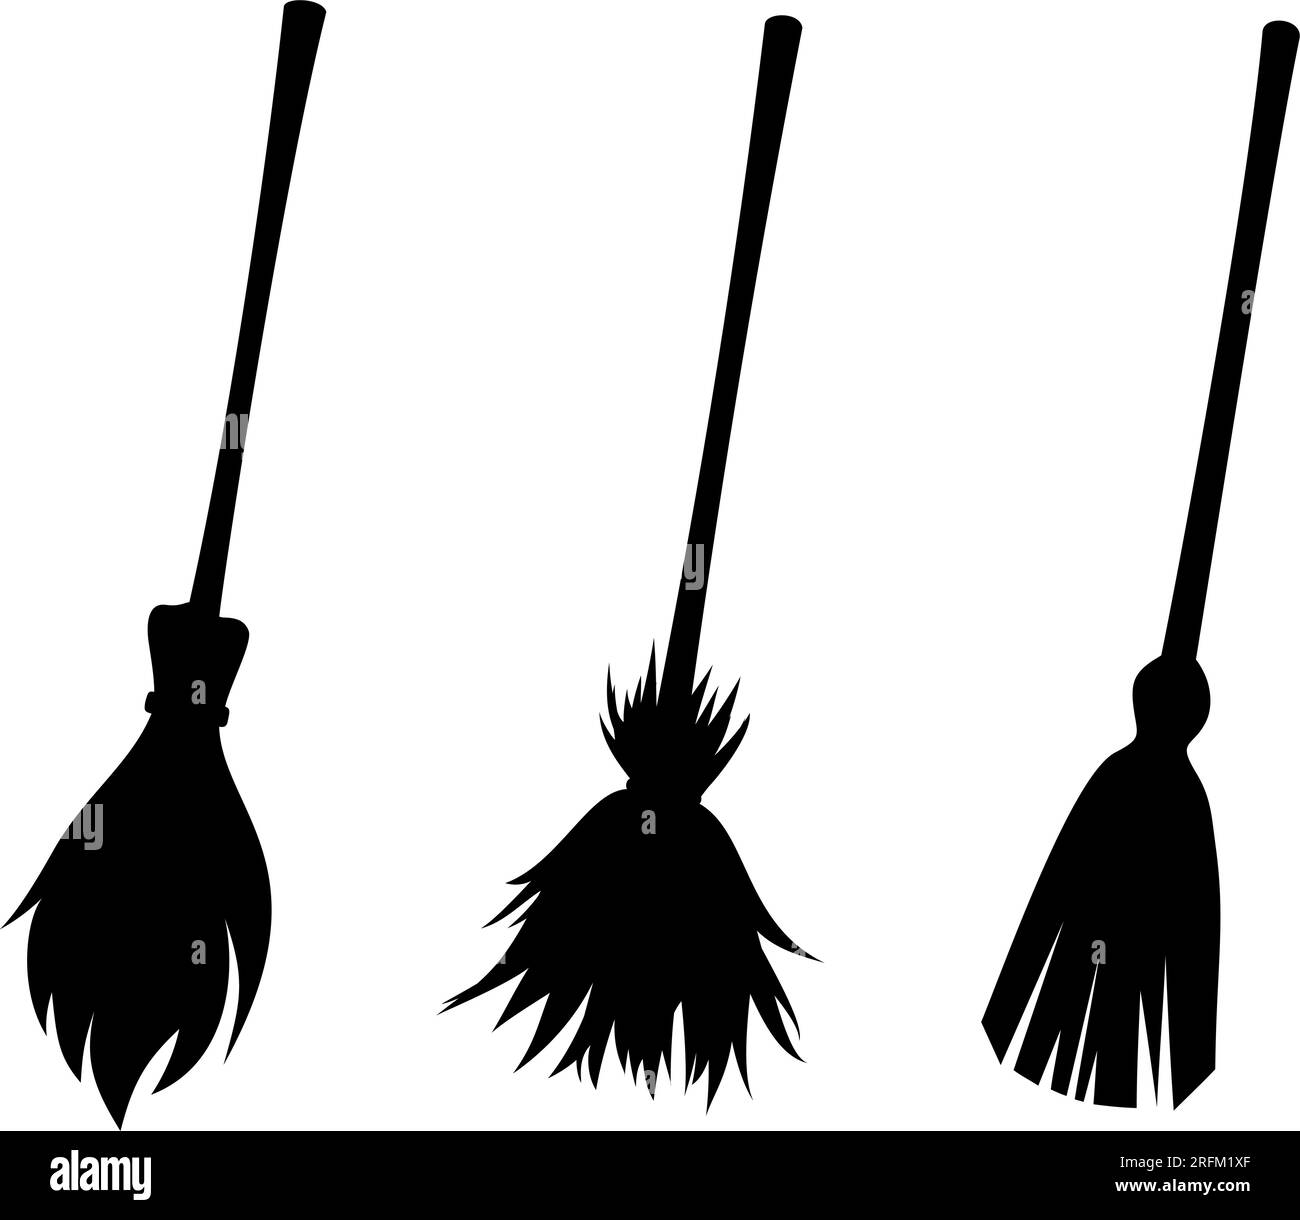 Witches brooms. Set of black silhouettes of brooms isolated on a white background. Vector illustration Stock Vector